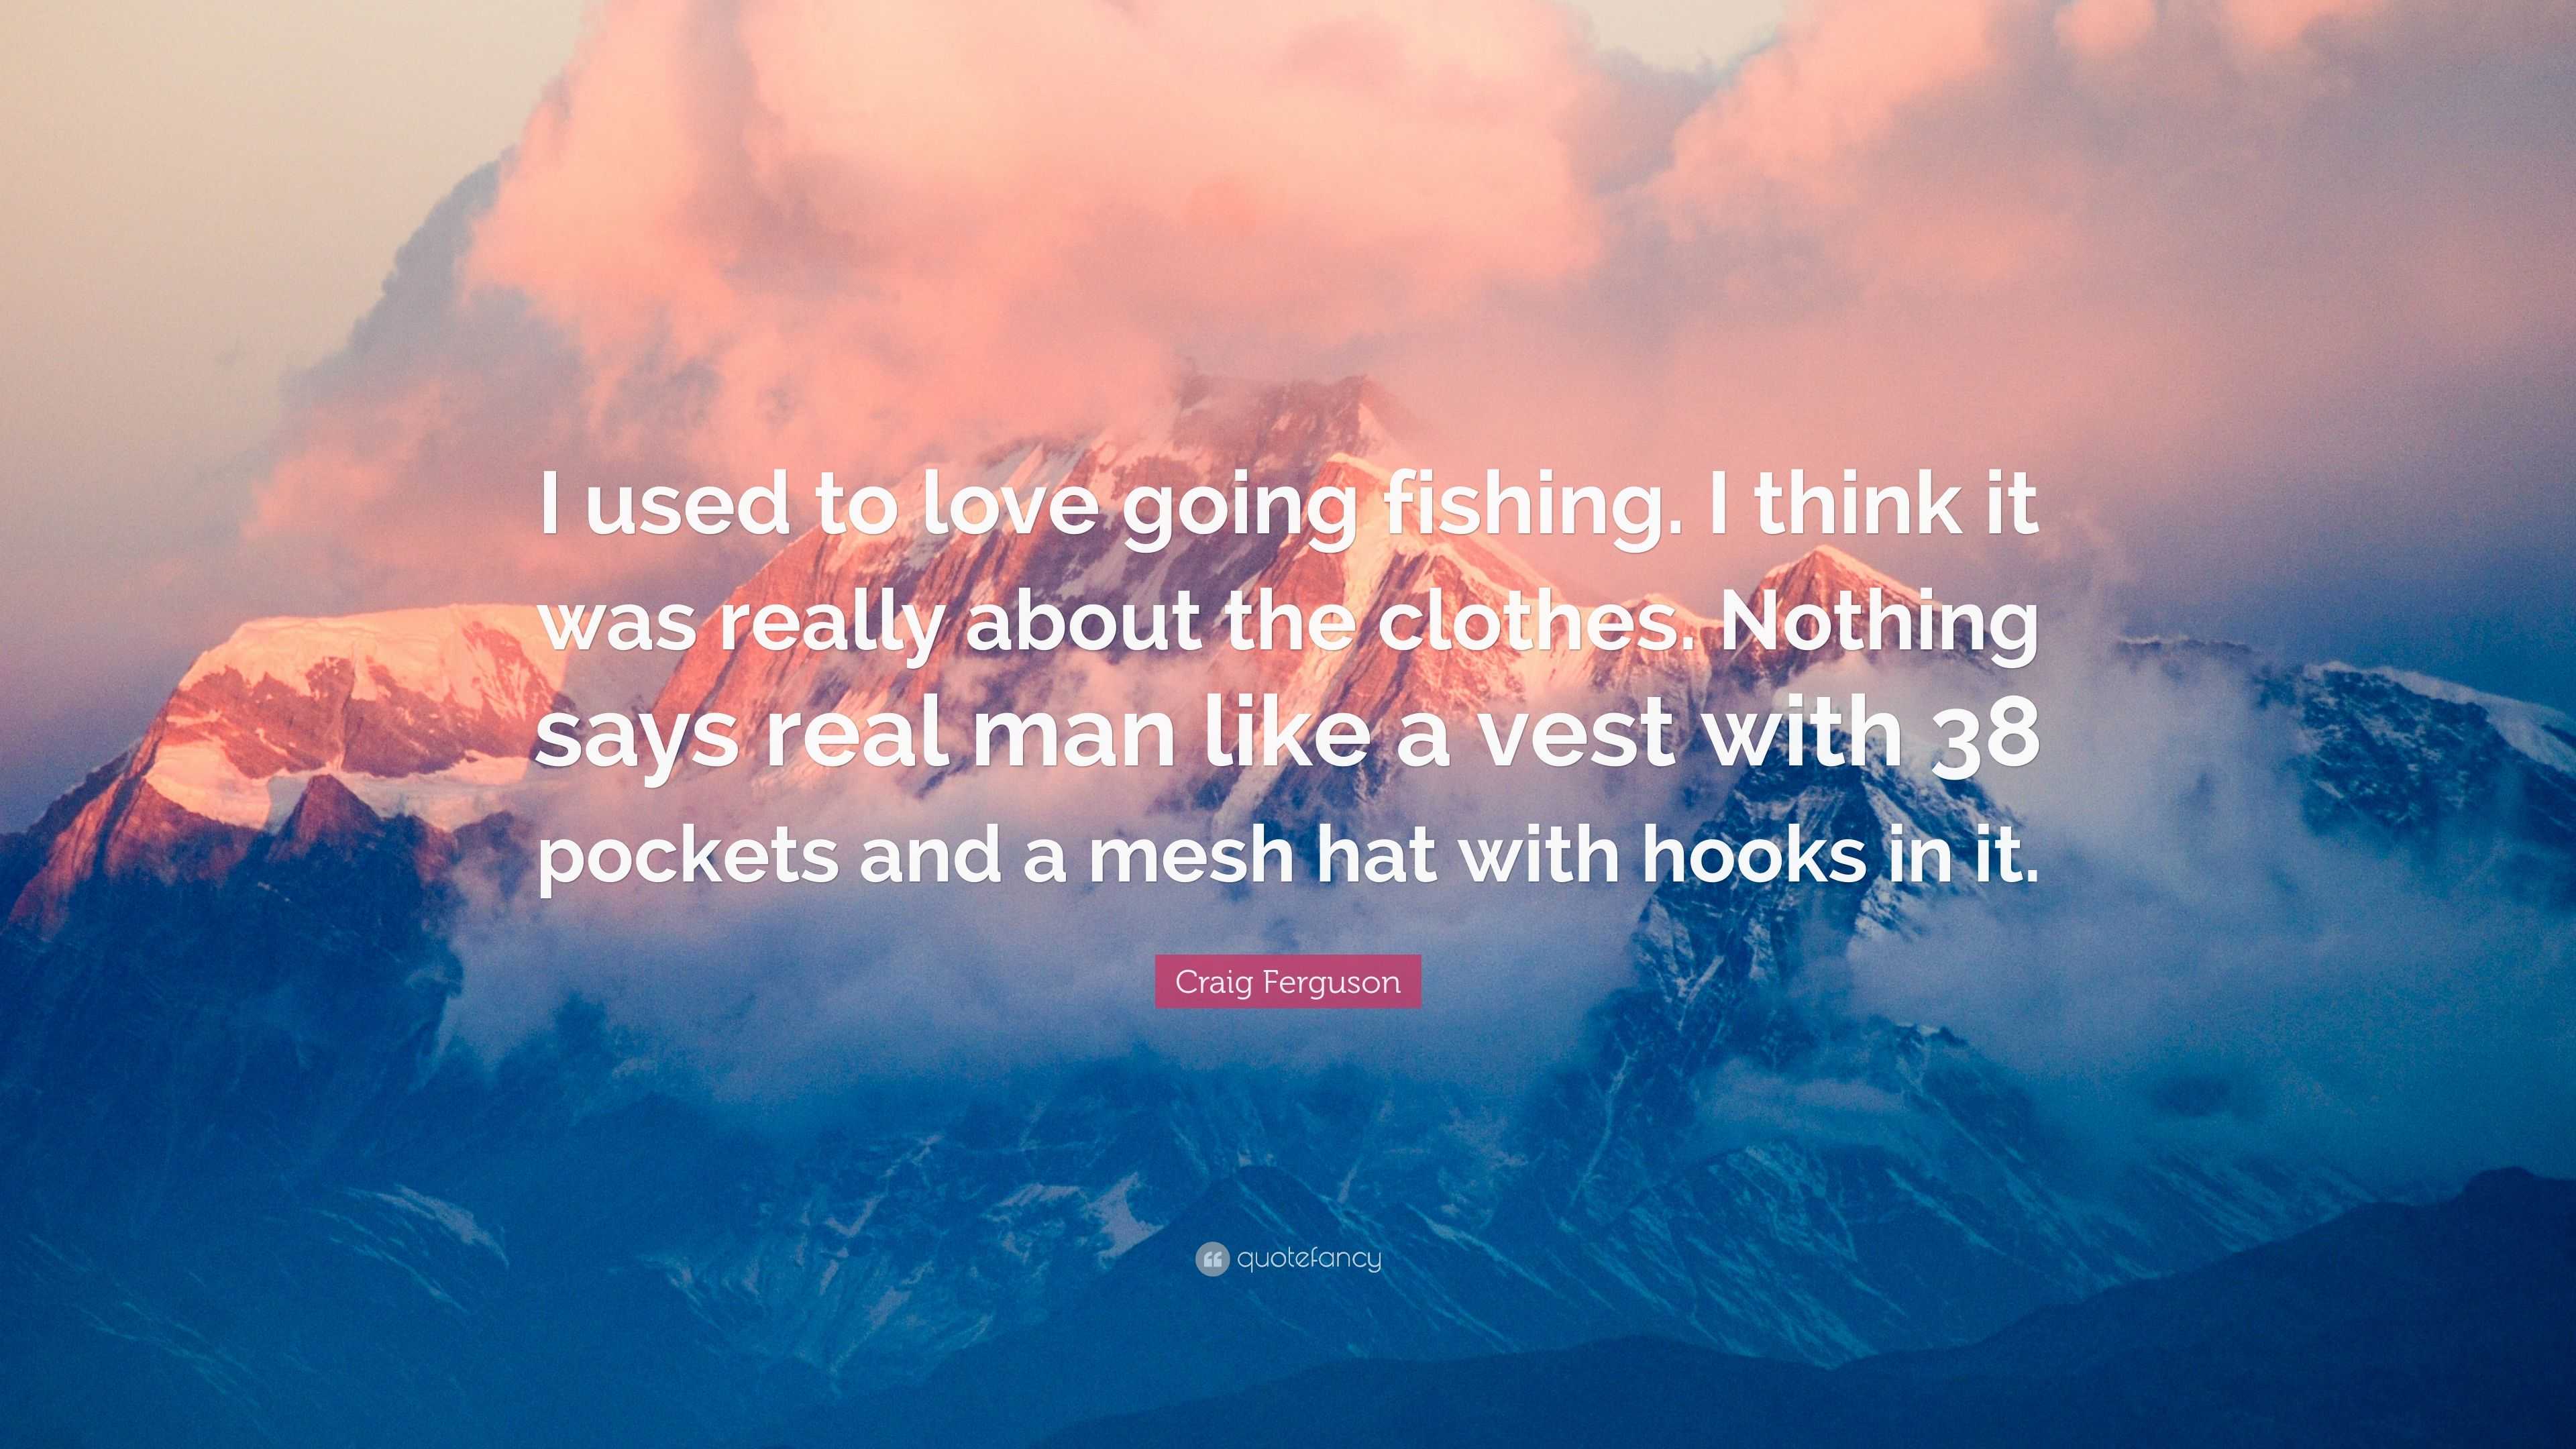 Craig Ferguson Quote: “I used to love going fishing. I think it was really  about the clothes. Nothing says real man like a vest with 38 pockets”